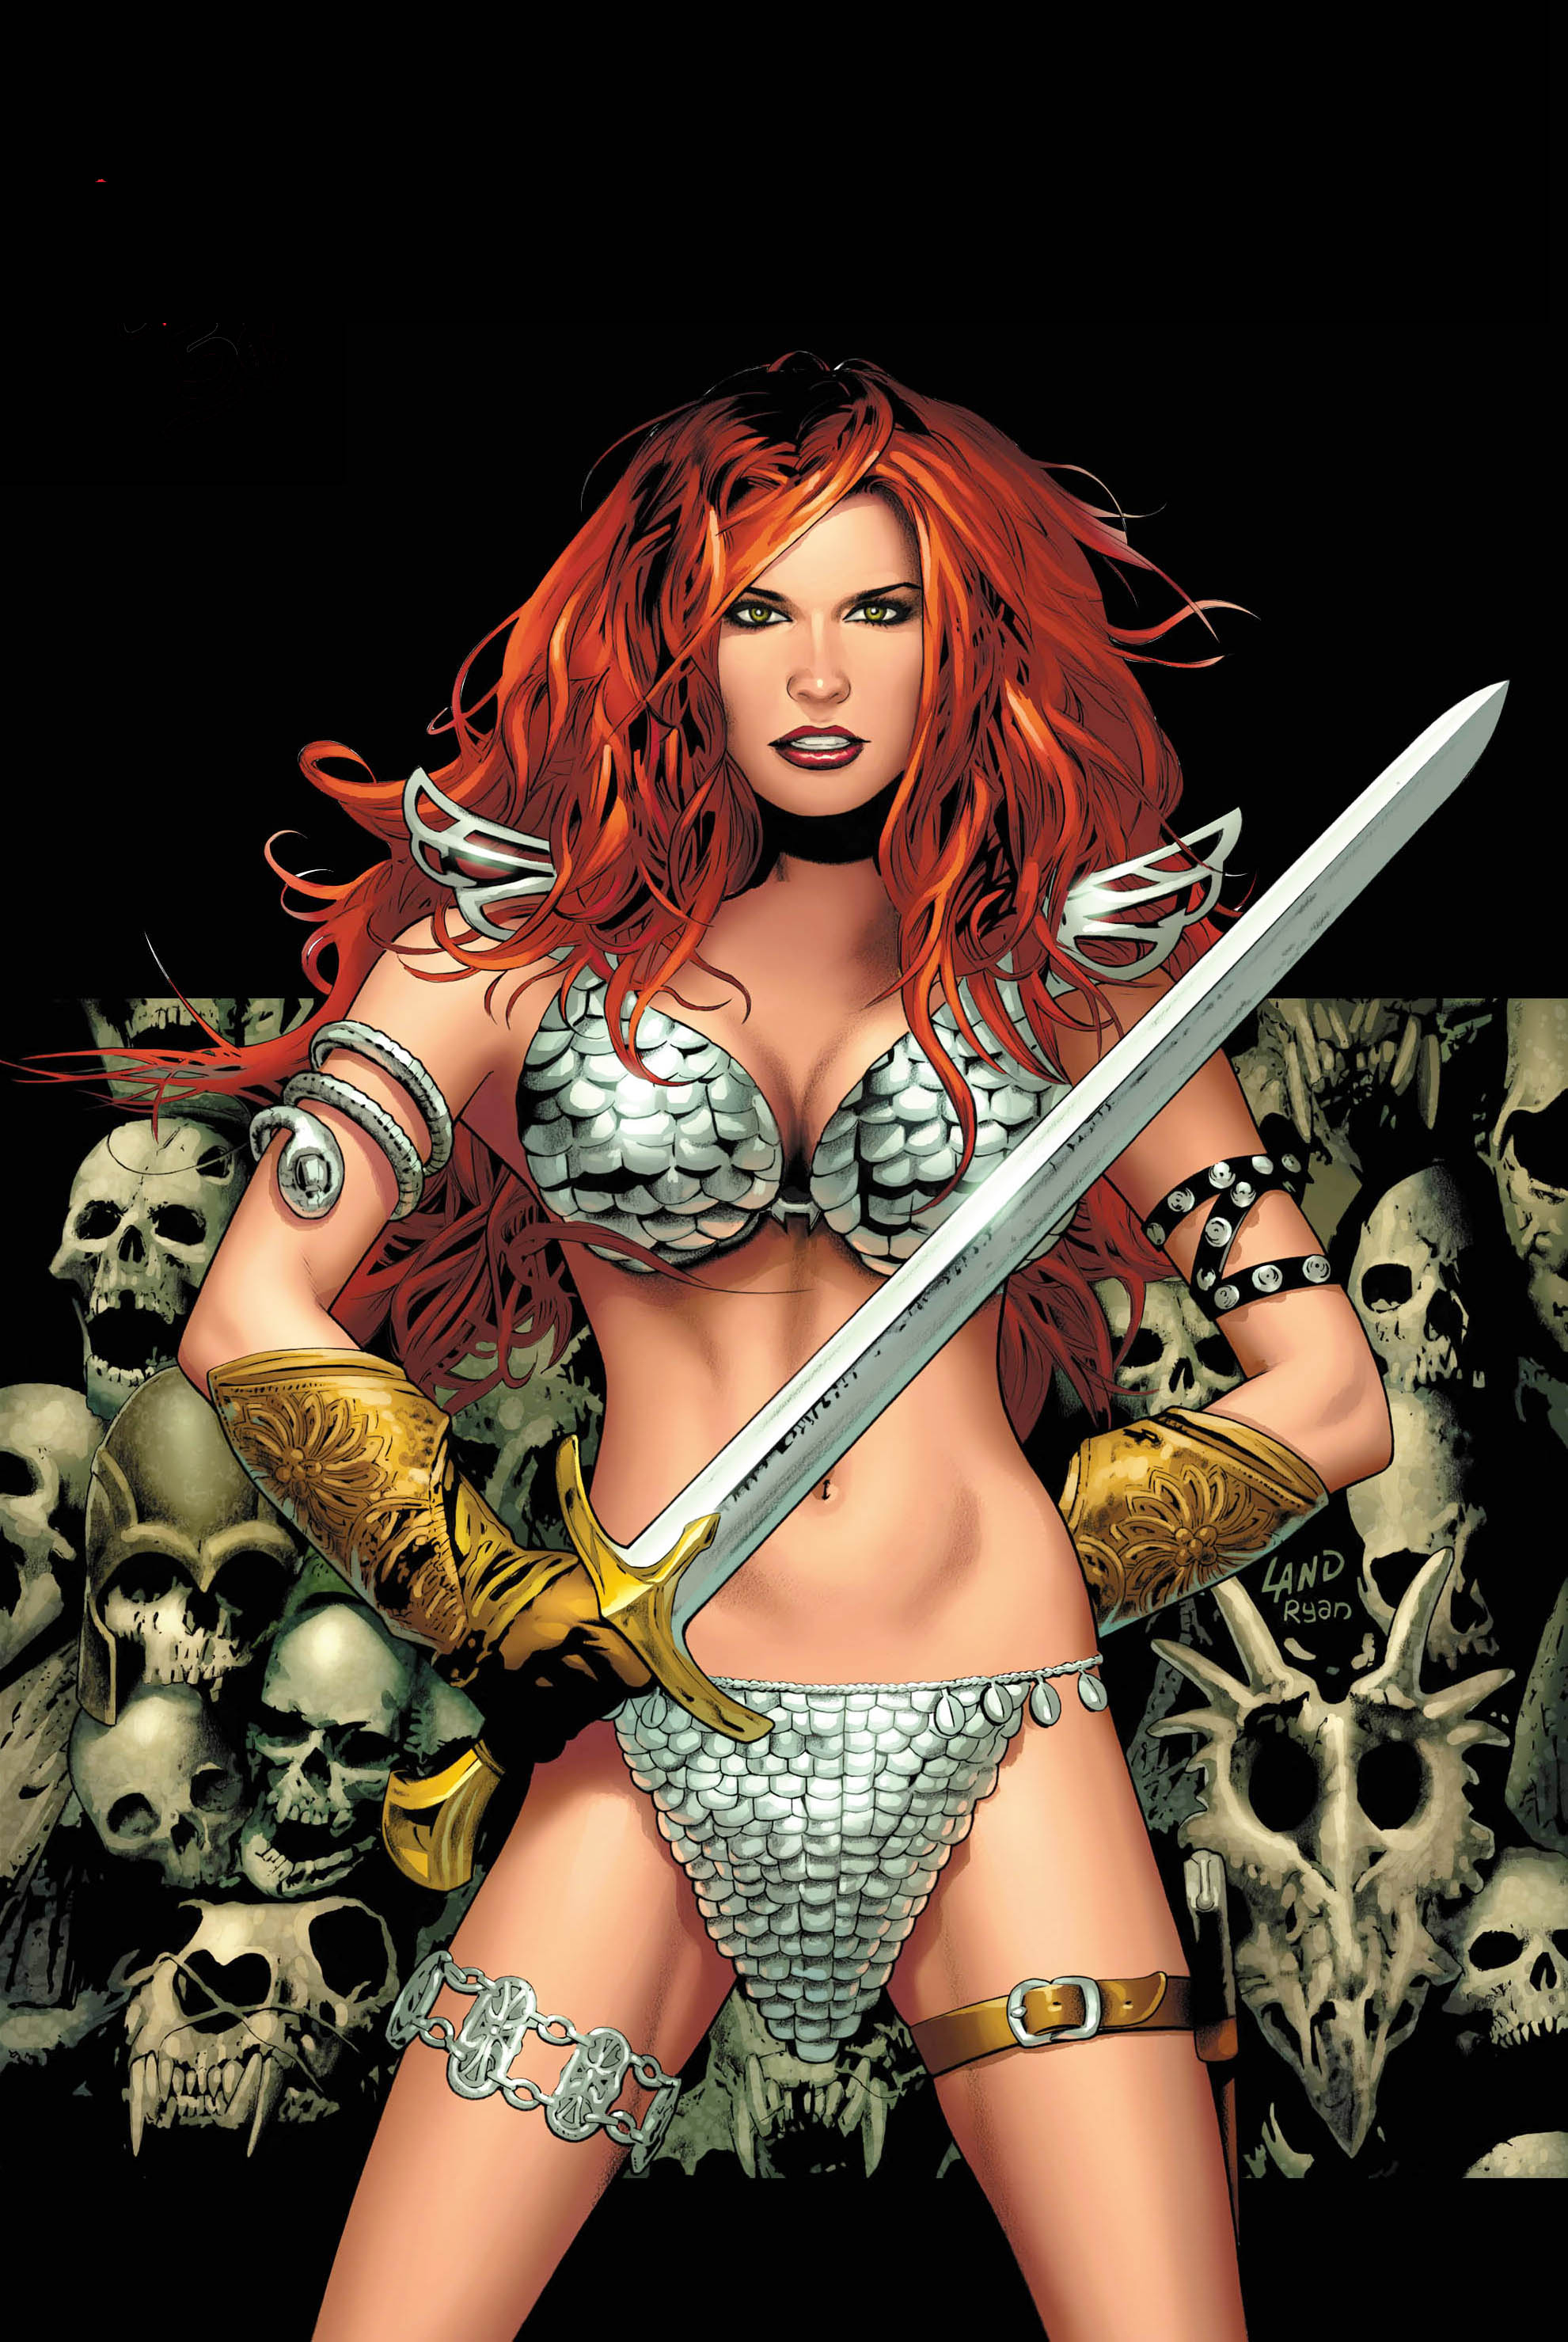 Chronicles of Conan - Red Sonja